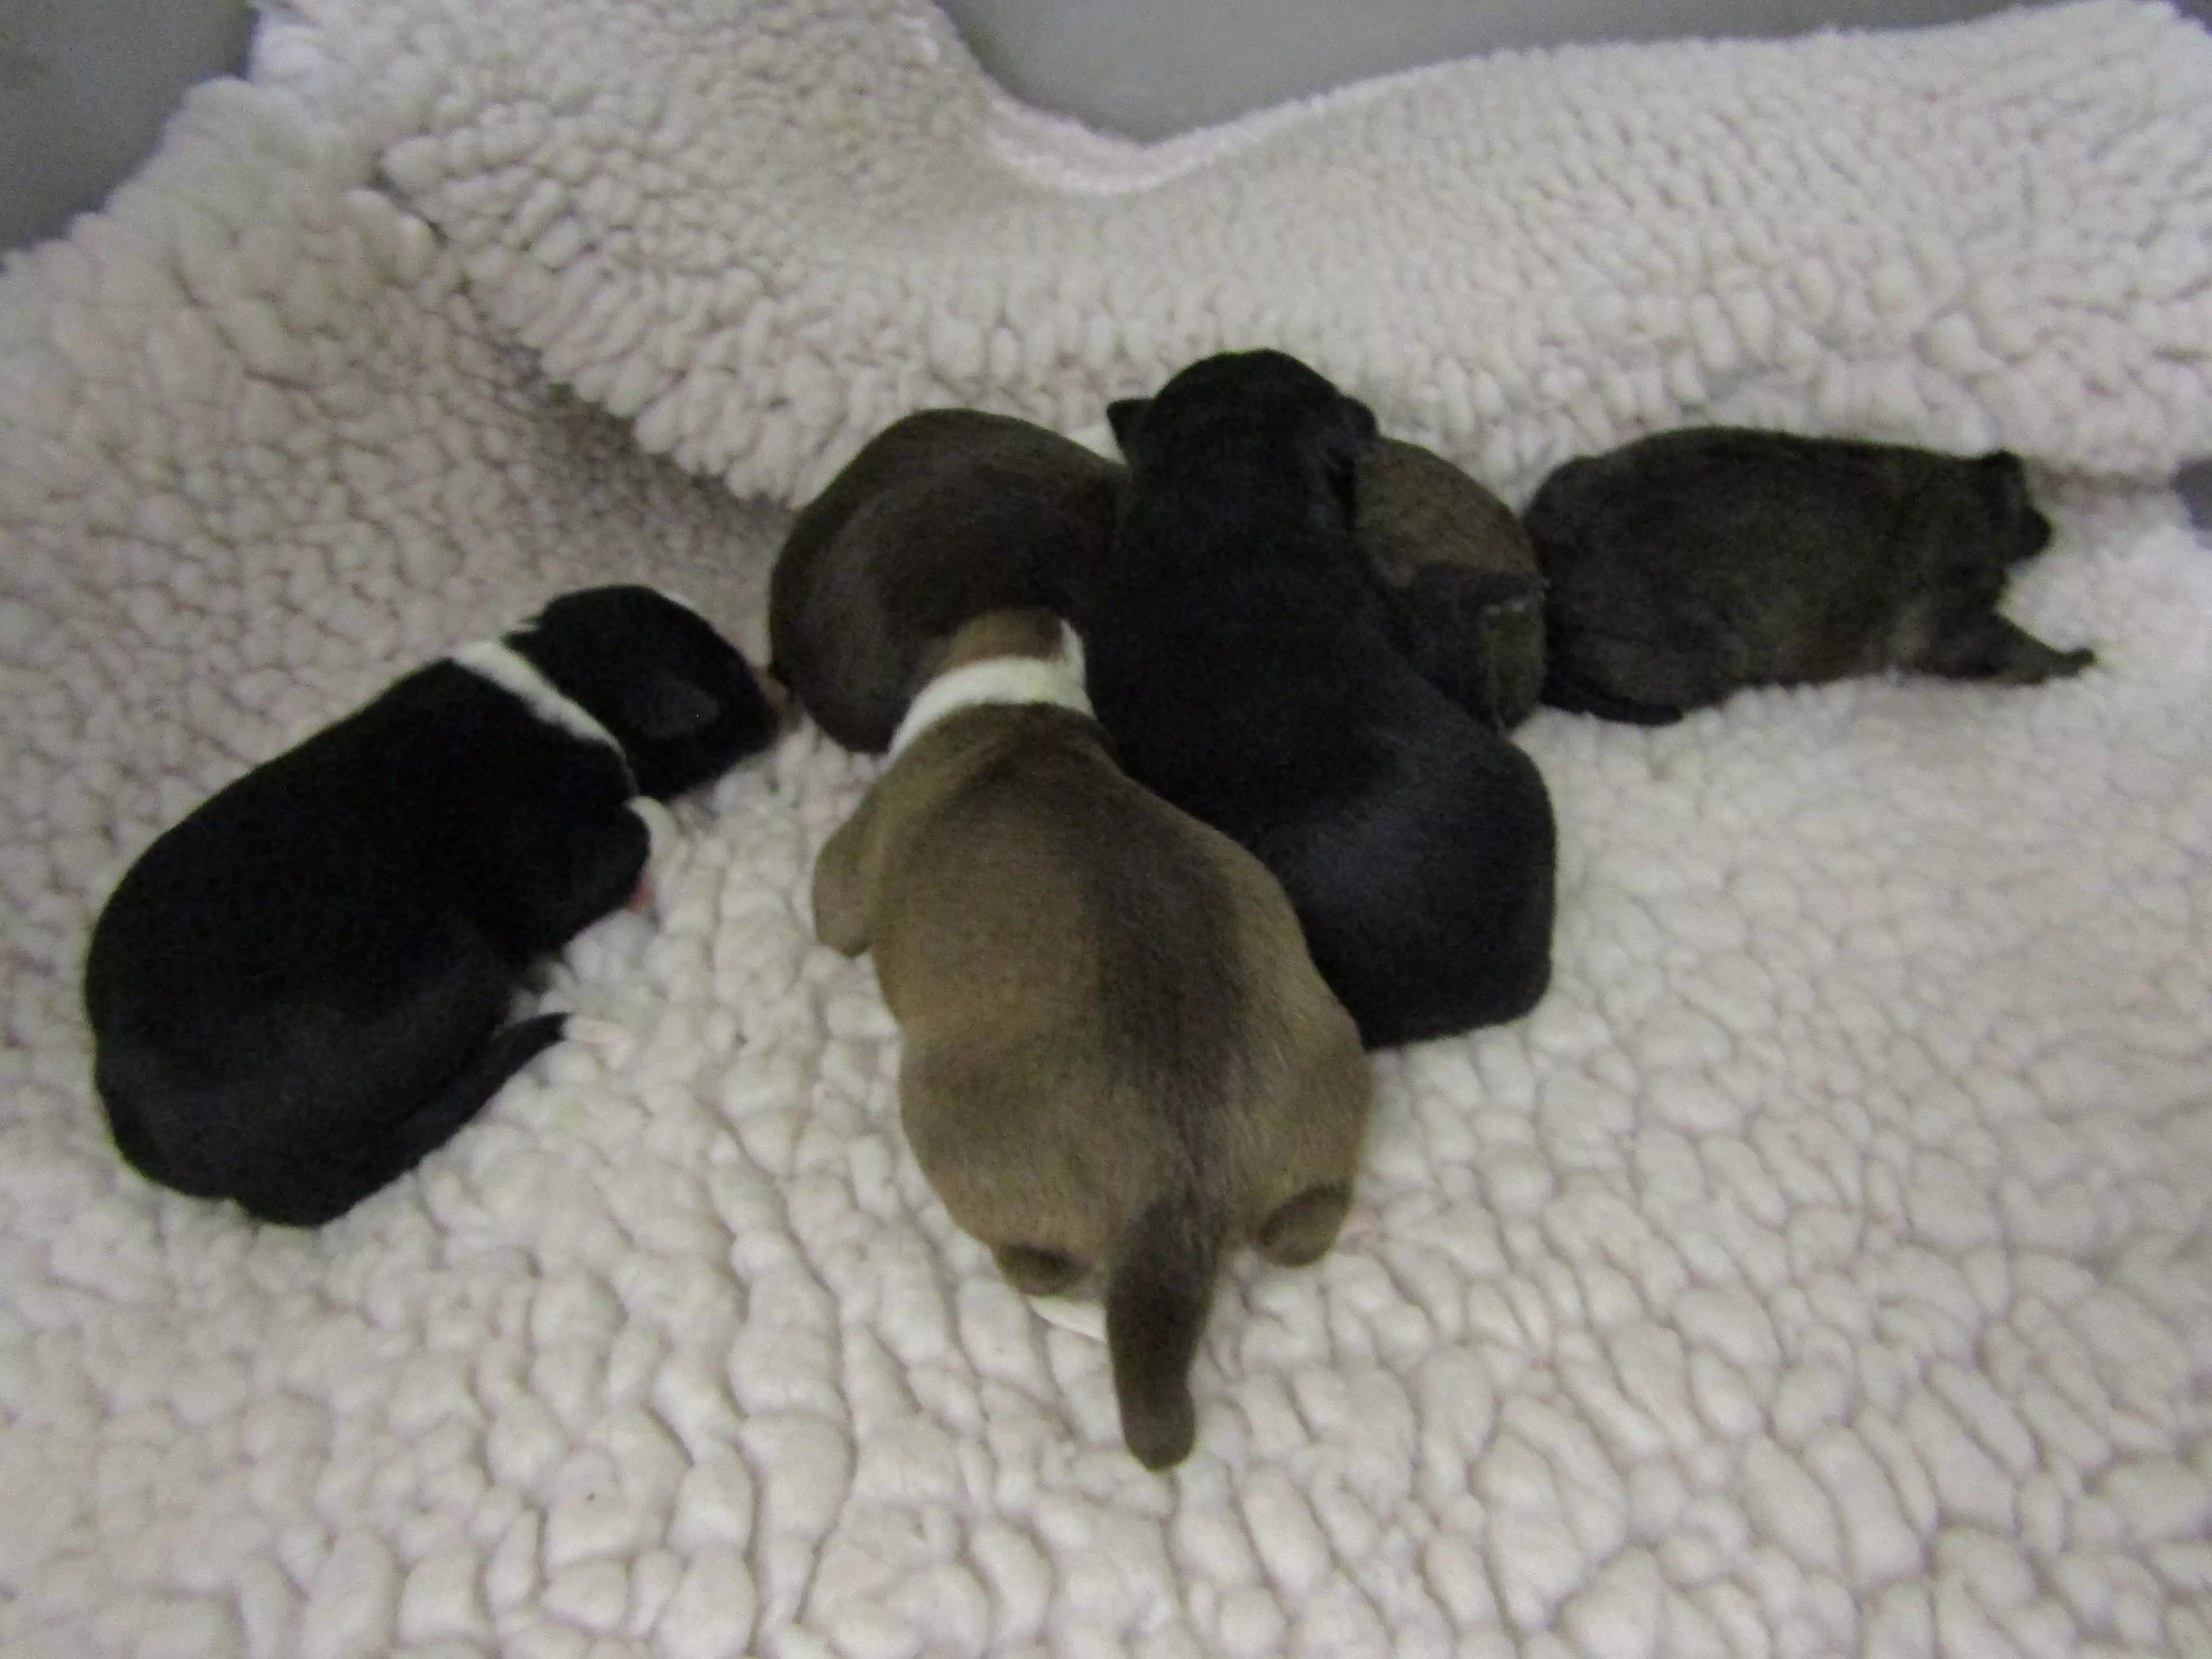 Her little puppies are Billy Ray, Dixie, Dolly, Dotty, June and Patsy. (